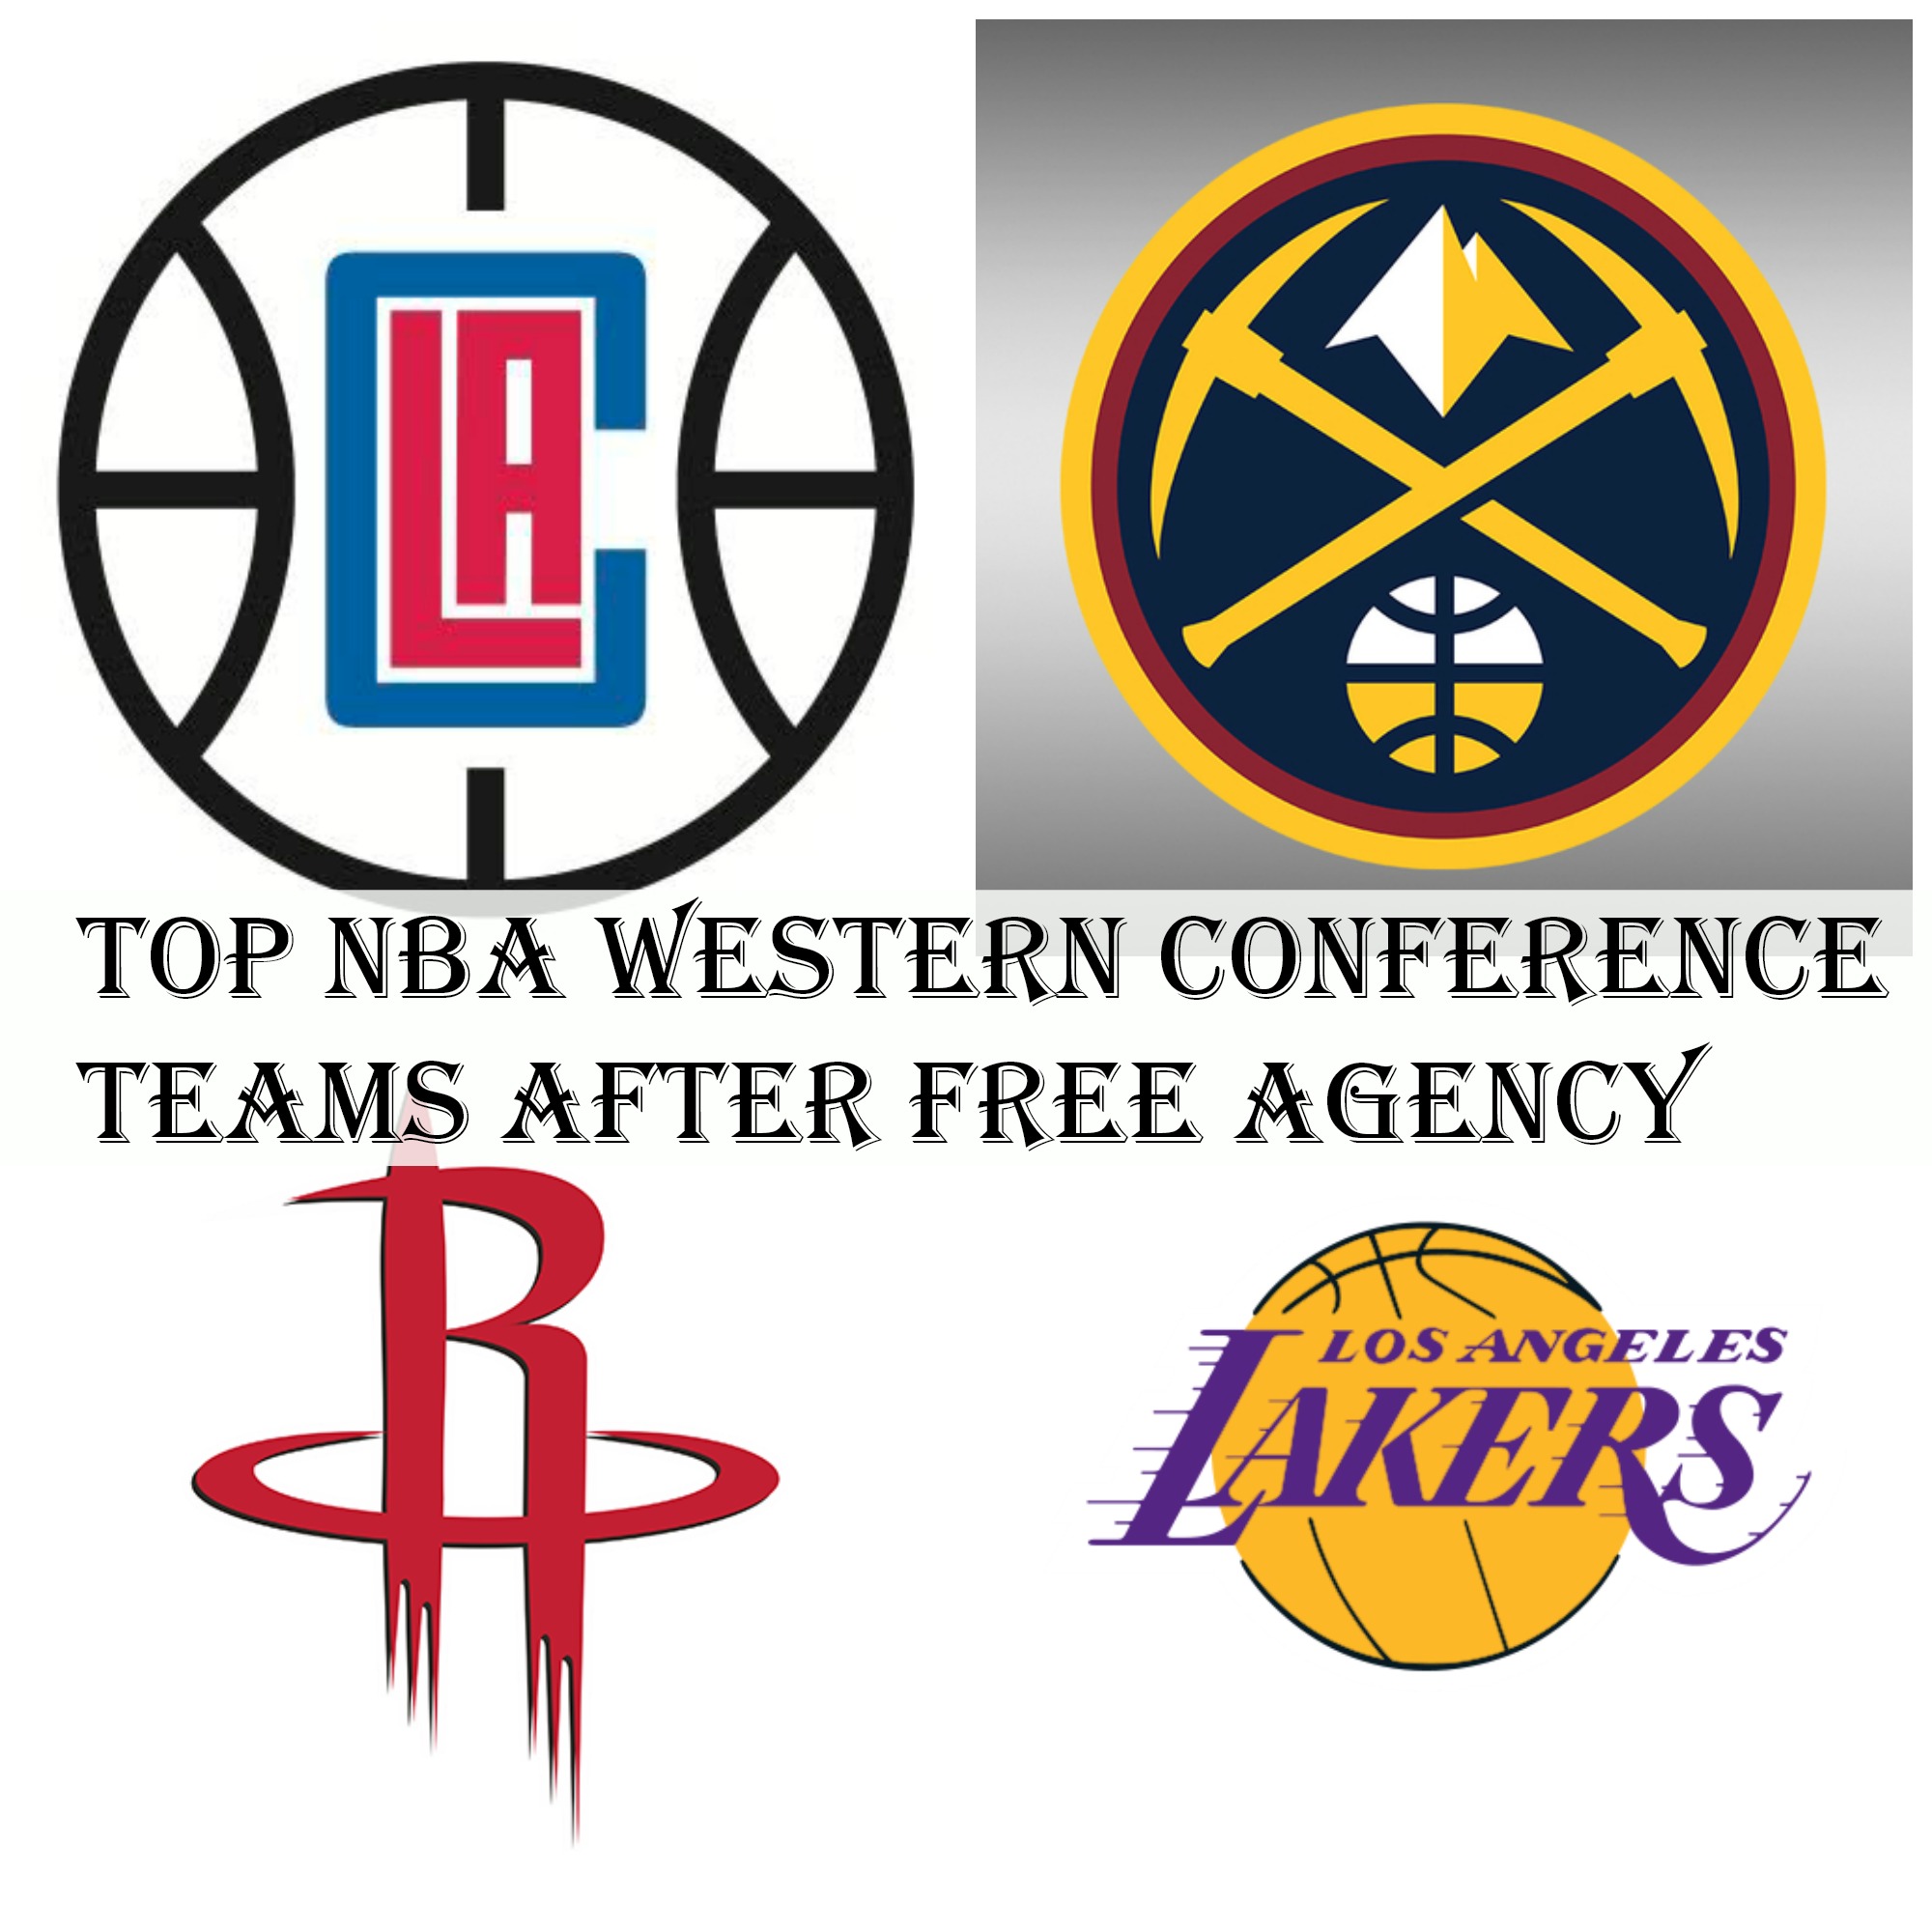 Top NBA Western Conference Teams After Free Agency